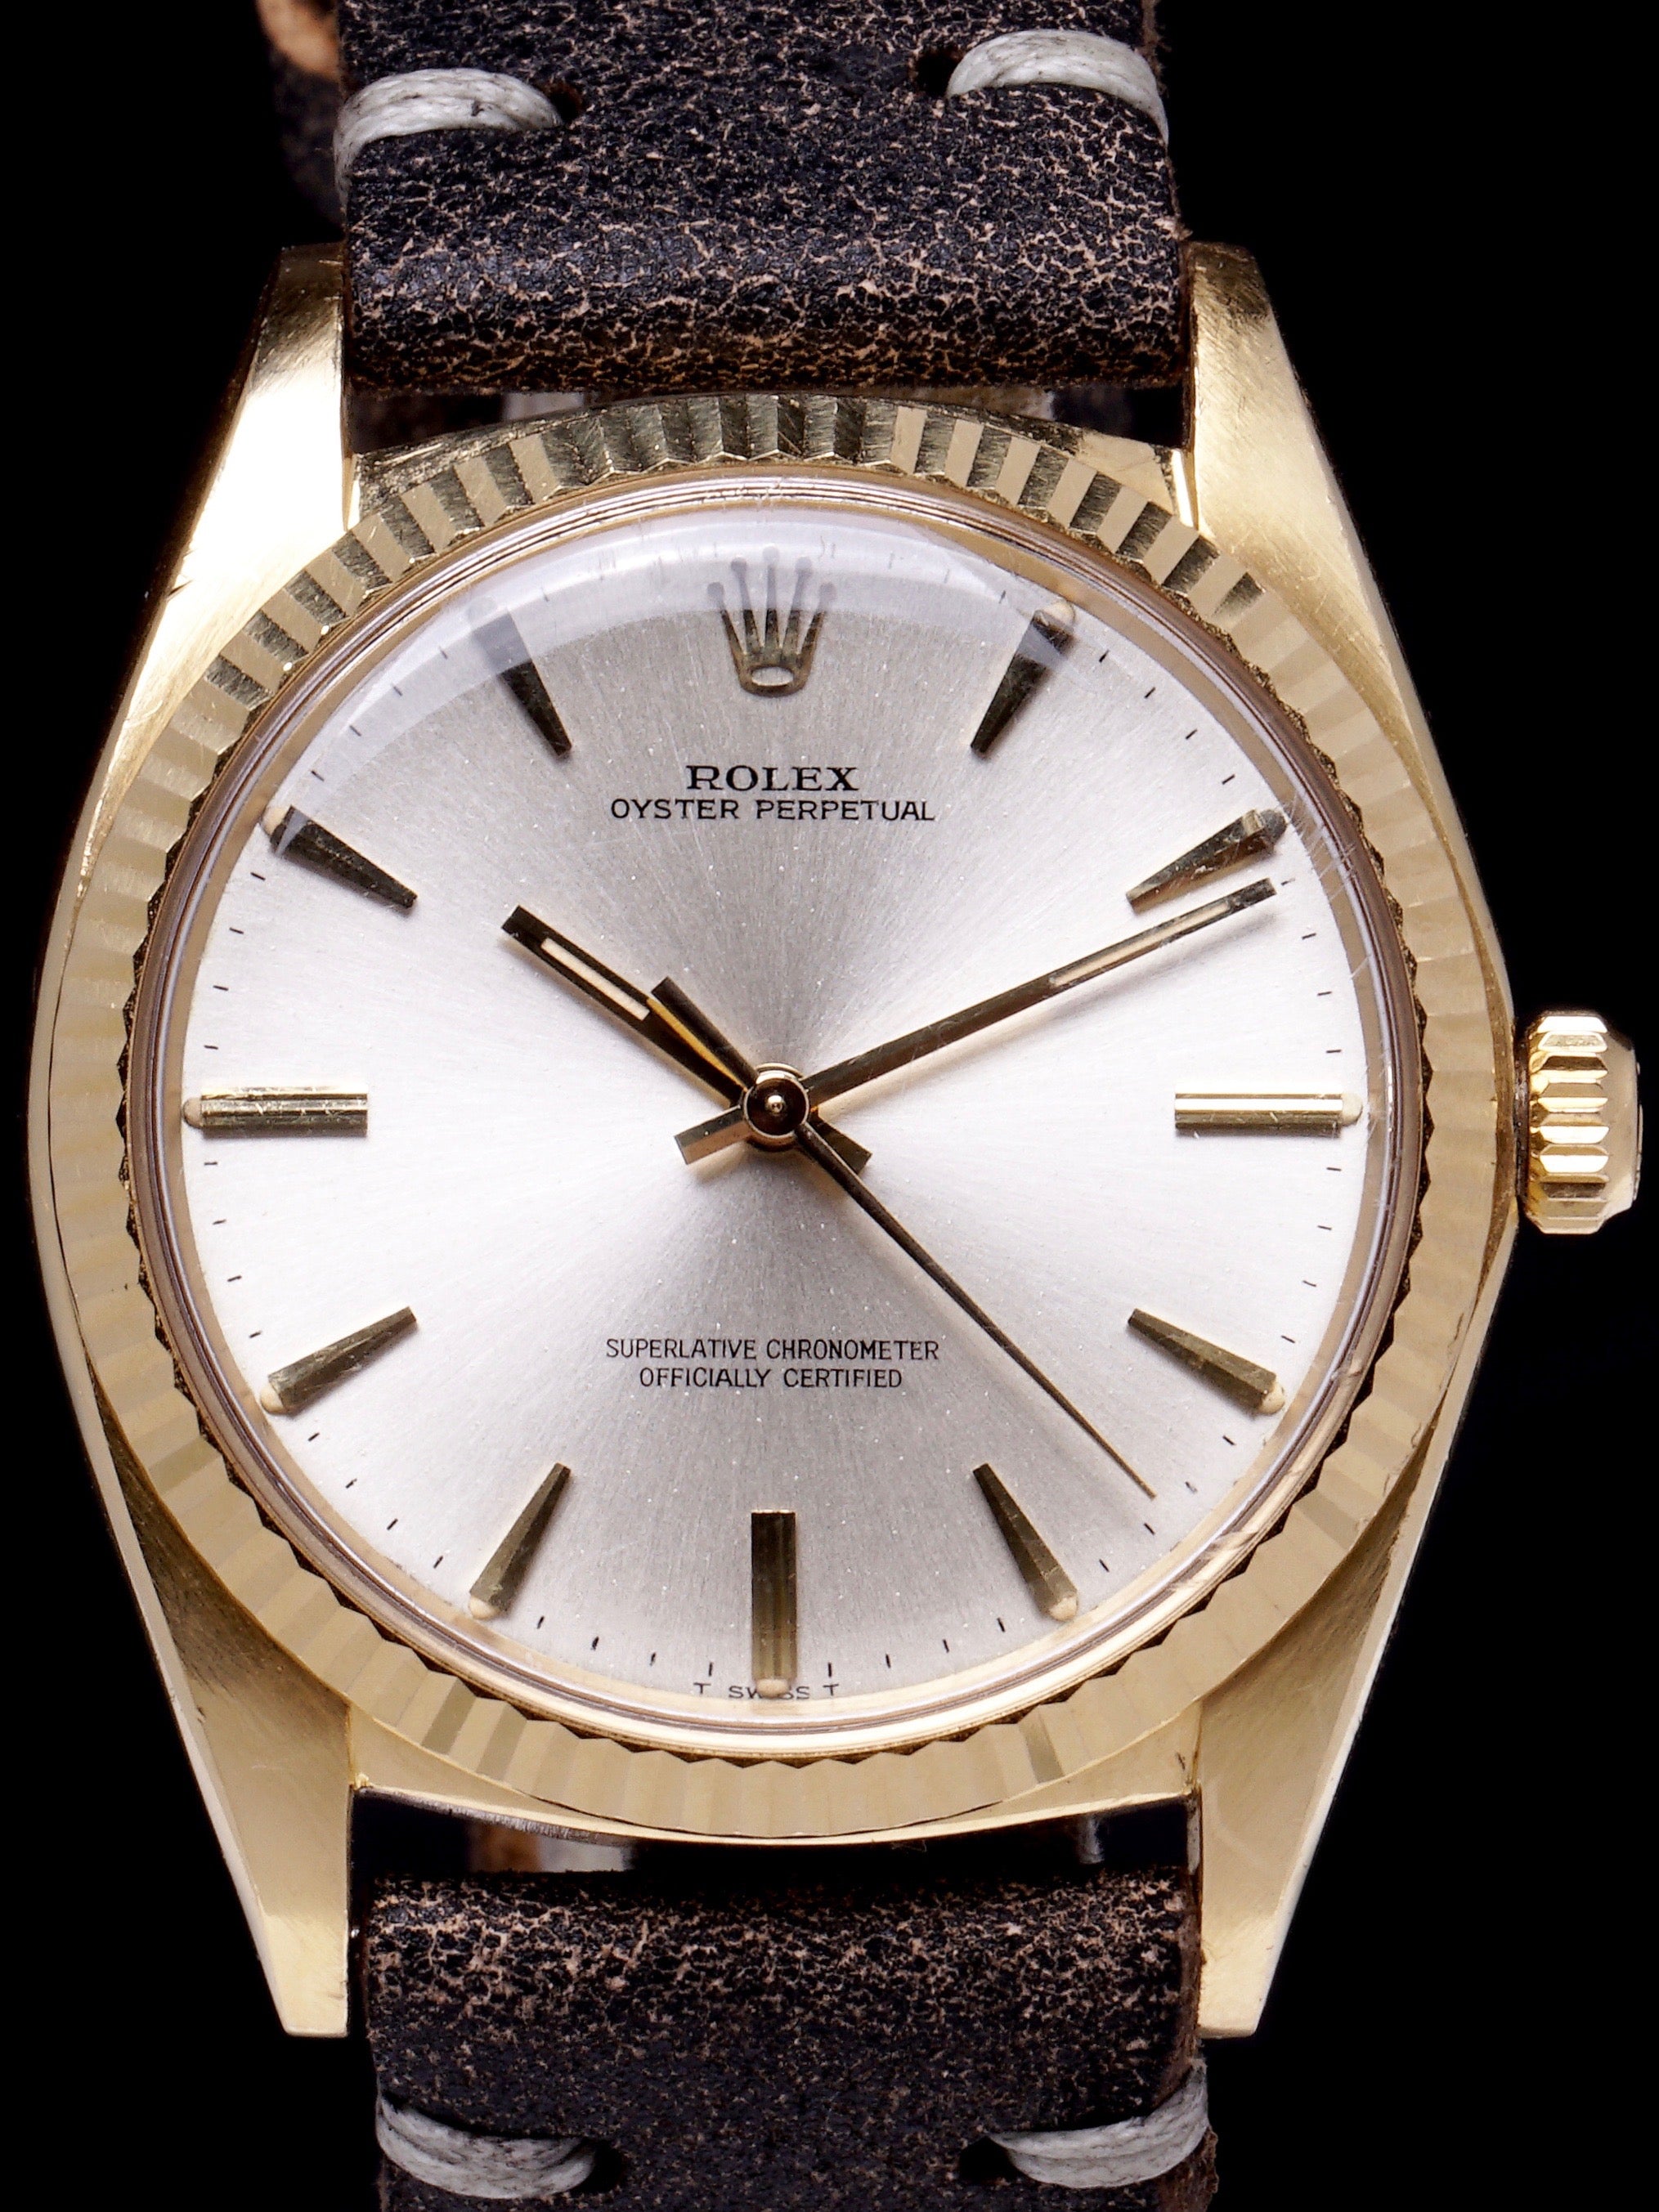 RARE 1966 Rolex Oyster-Perpetual (Ref. 1013) 18K YG "Oversized Case"